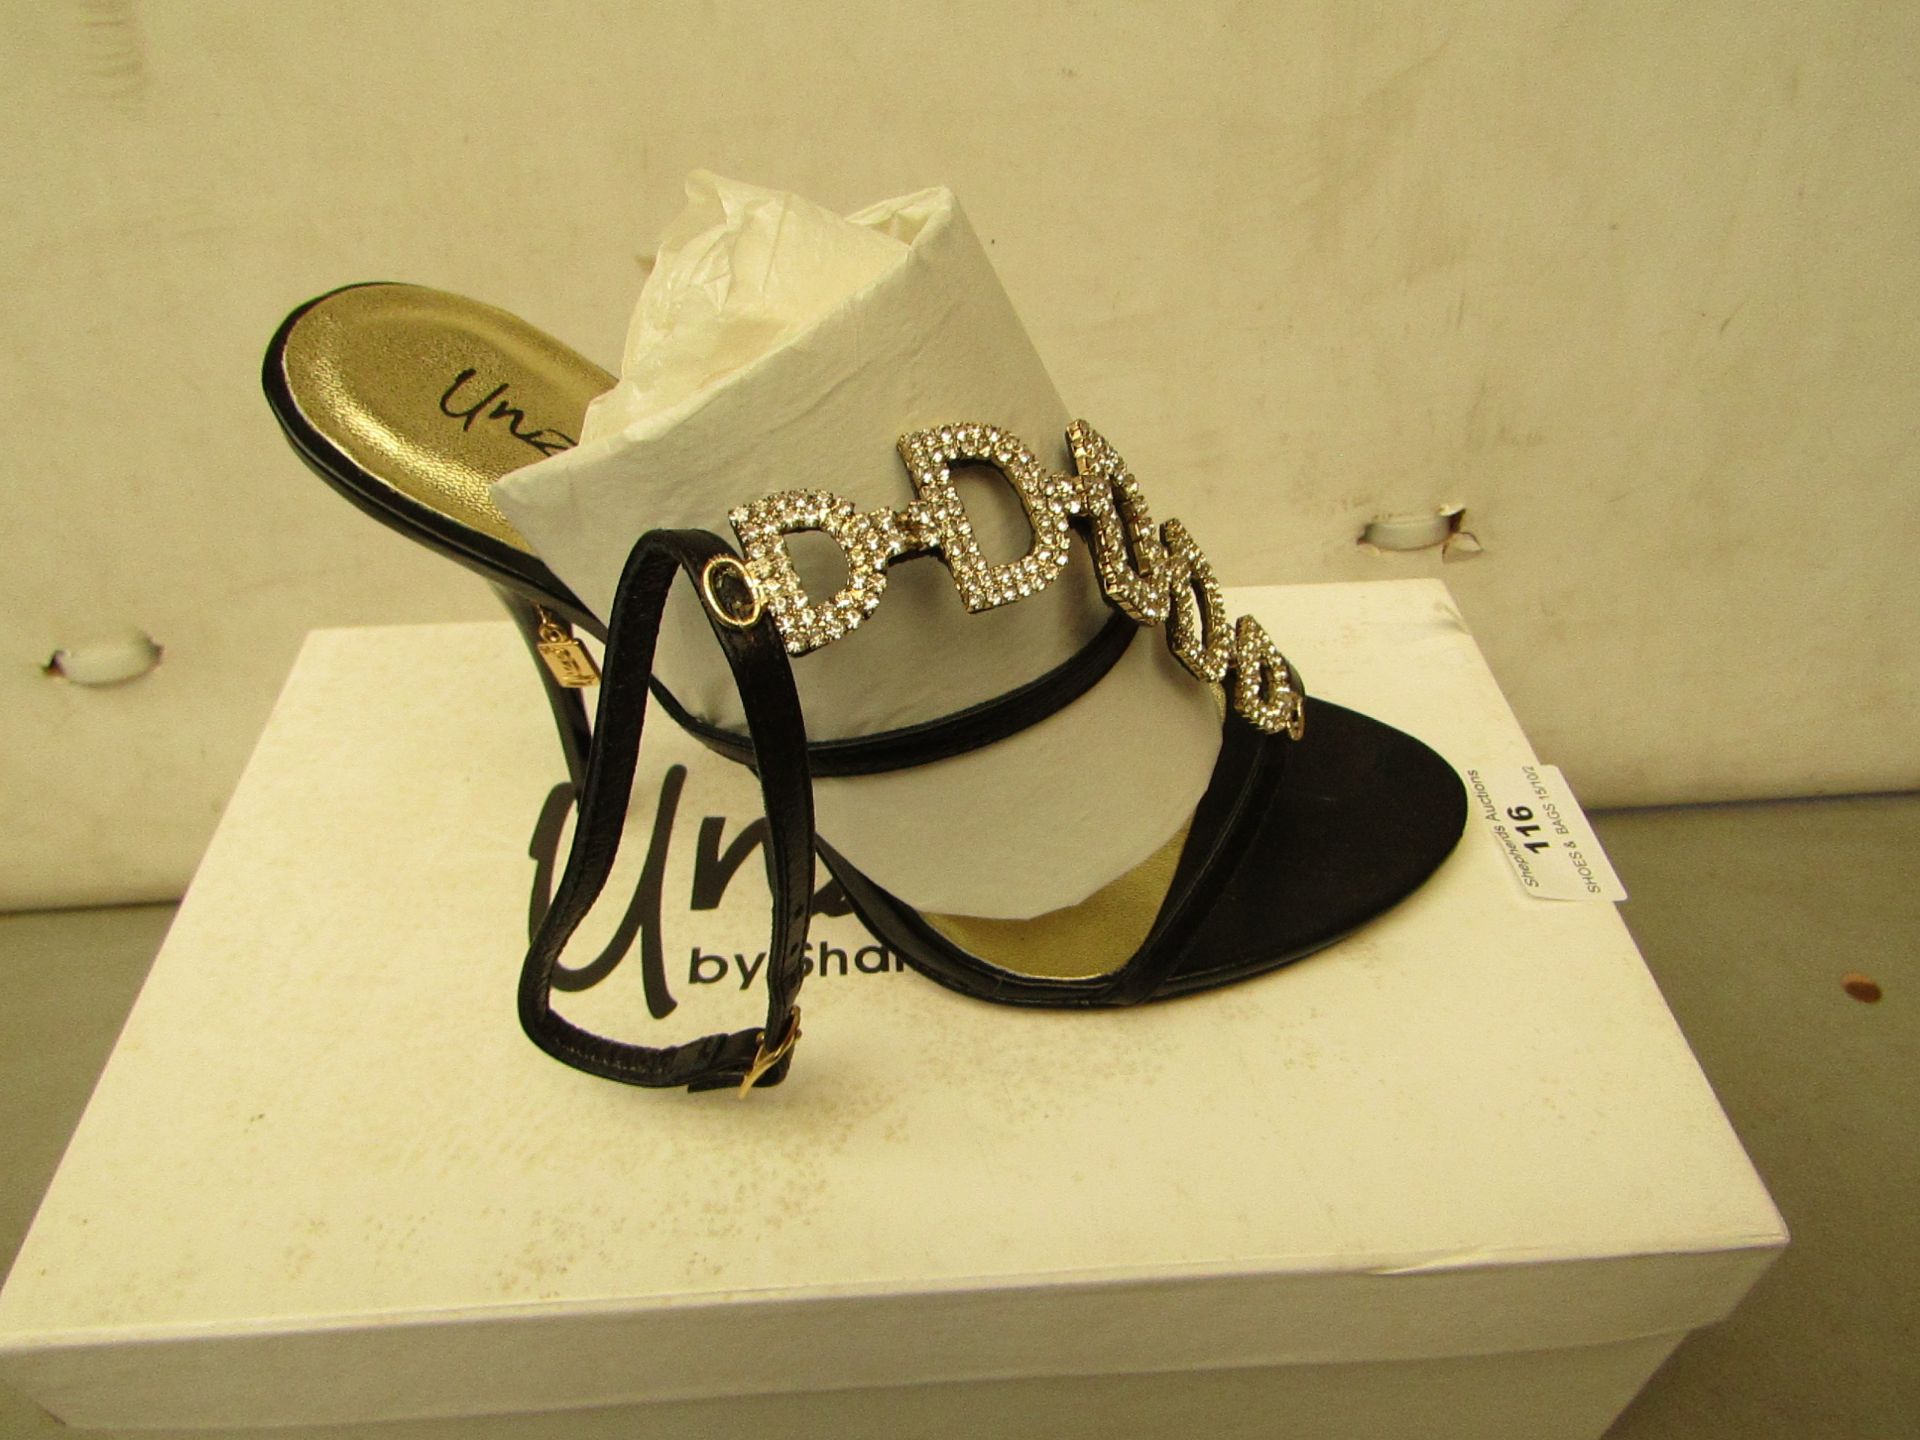 Zaif by Shalamar Shoes Ladies Black & Diamante Shoes size 5 new & boxed see image for design